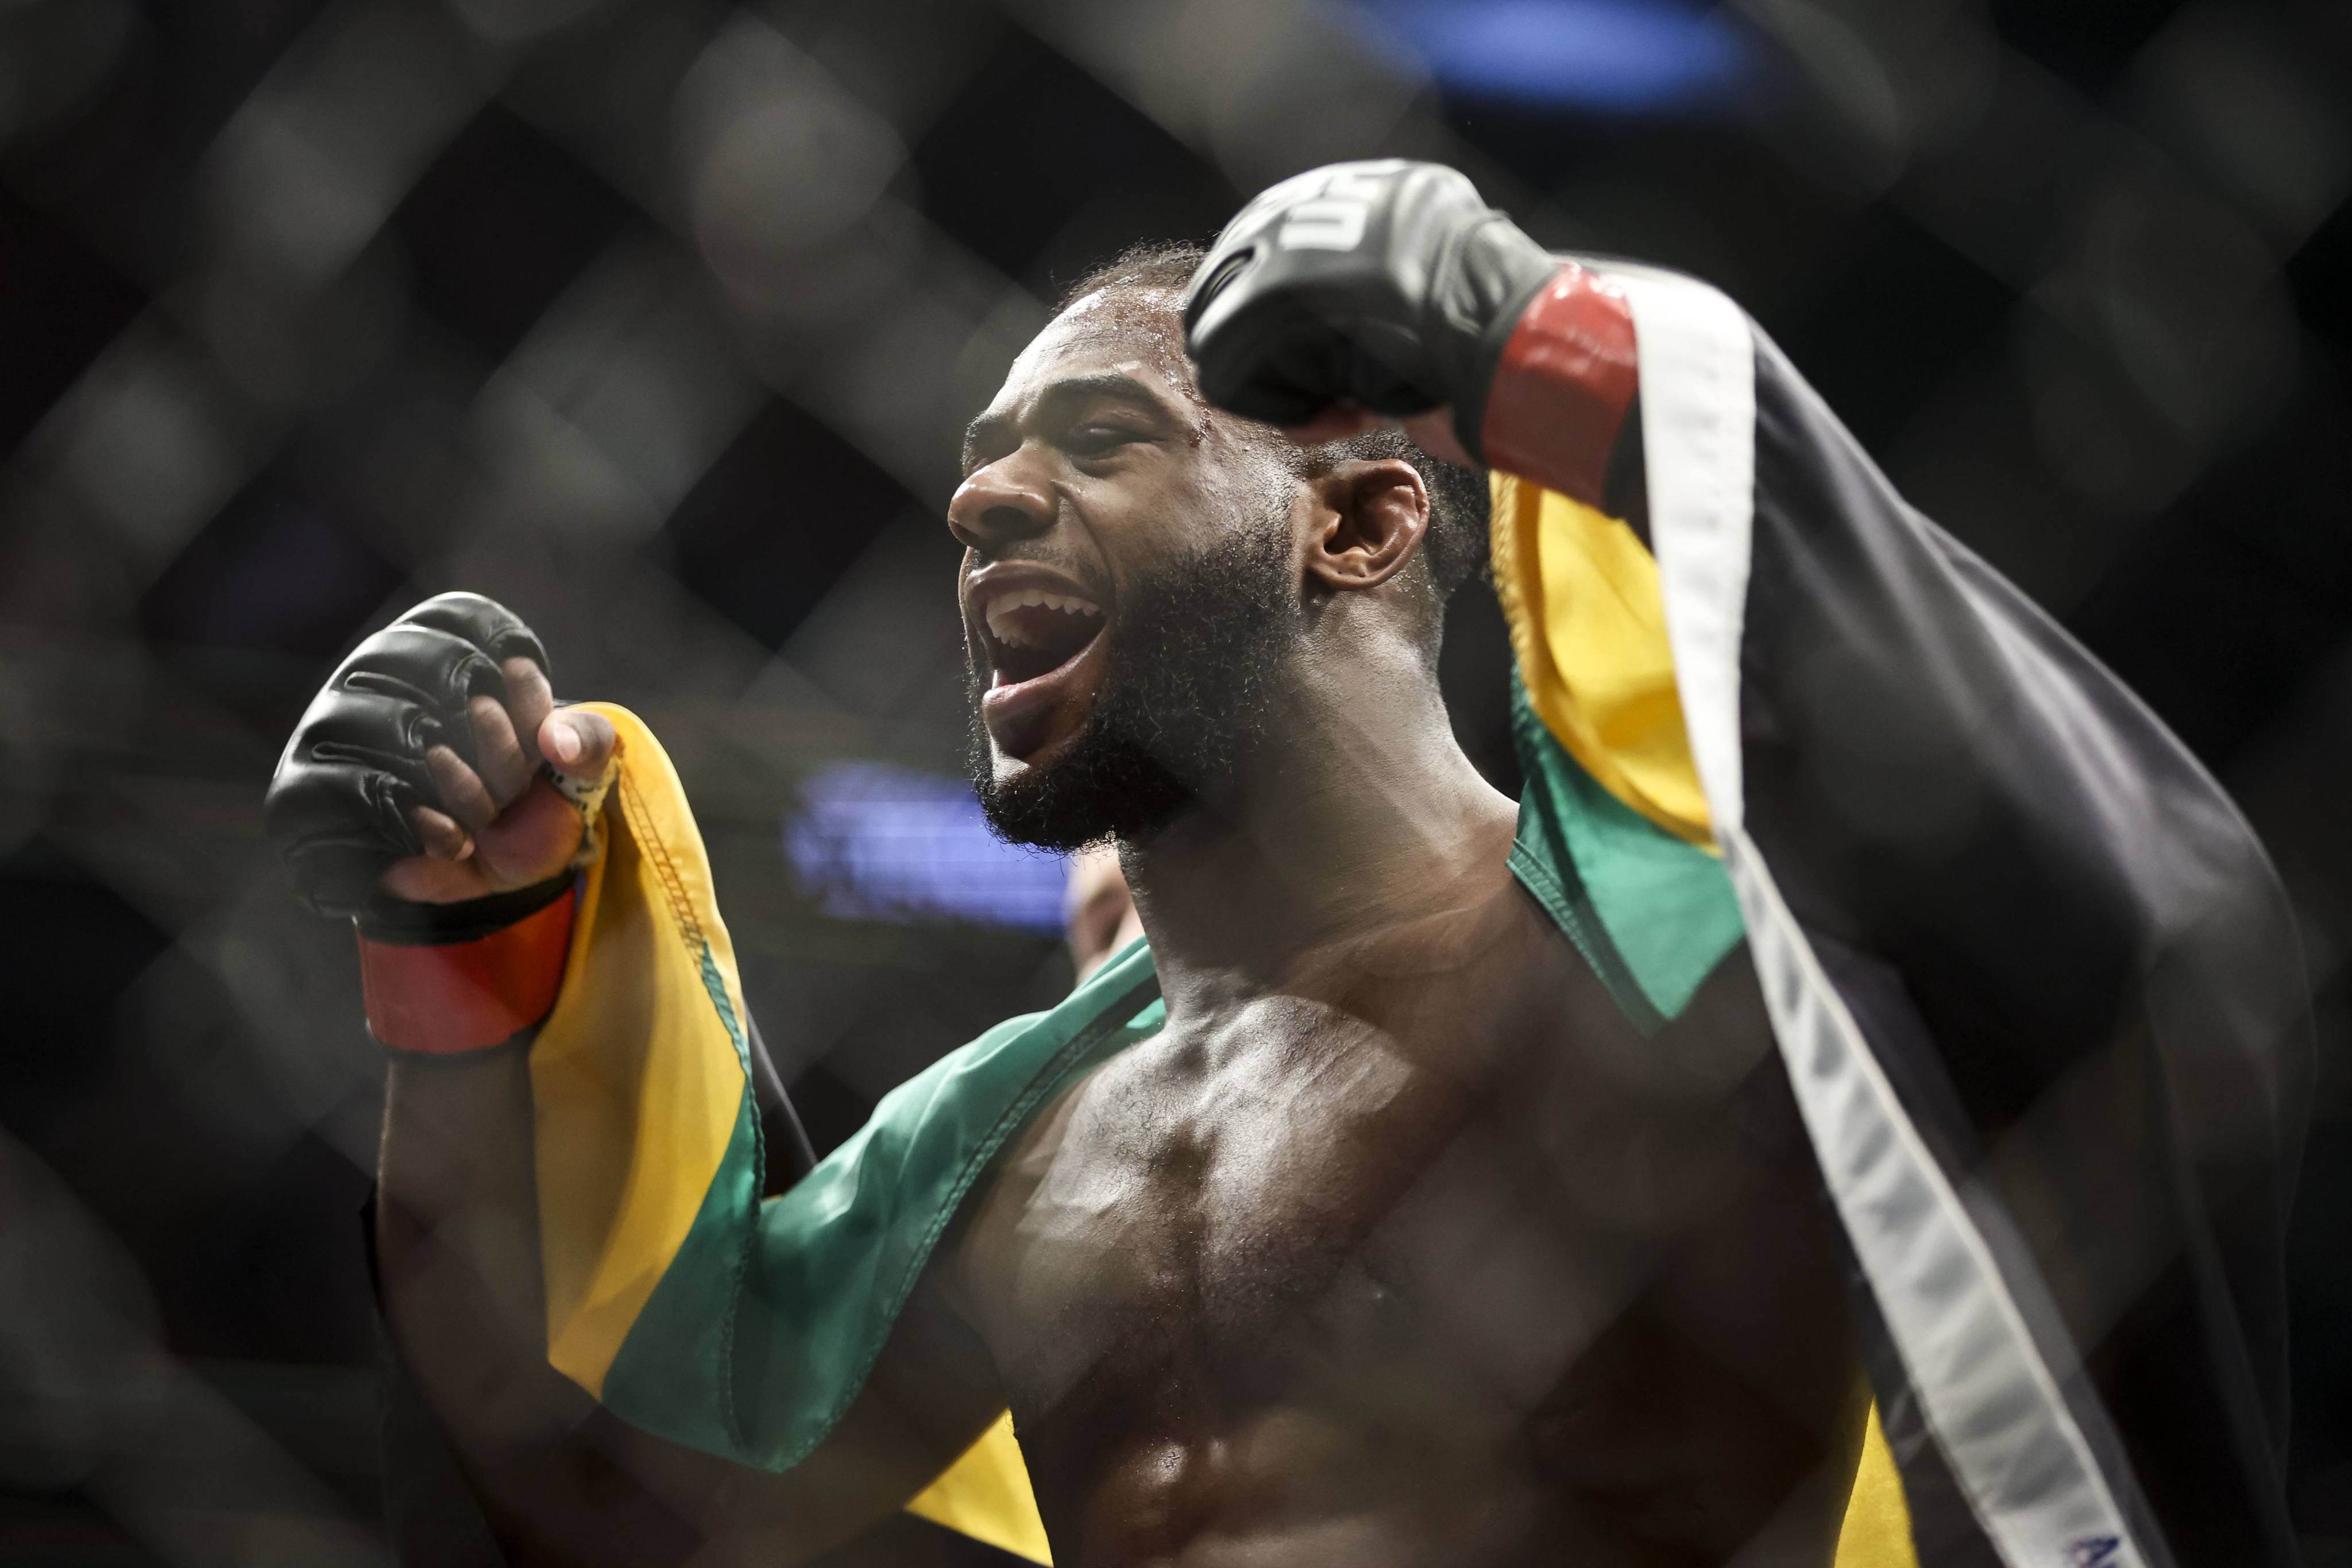 Aljamain Sterling celebrates after beating Petr Yan by decision at UFC 273 in Jacksonville, Florida. Photo: James Gilbert/Getty Images/AFP